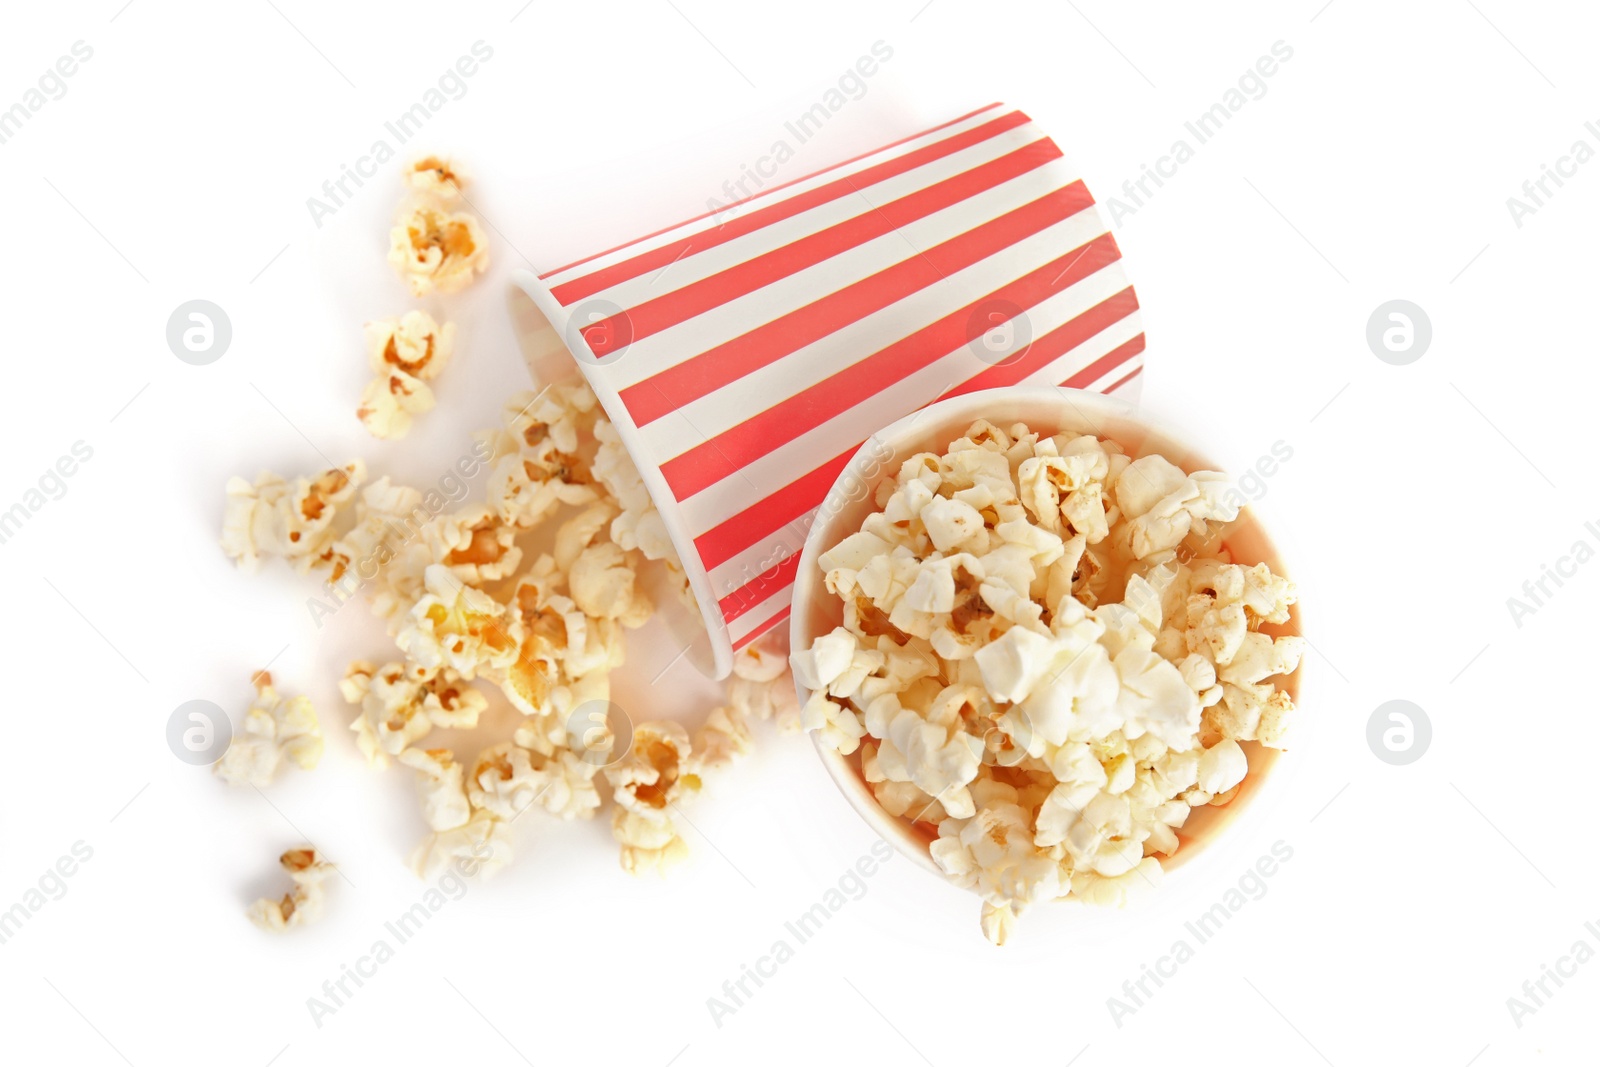 Photo of Buckets of tasty pop corn isolated on white, top view